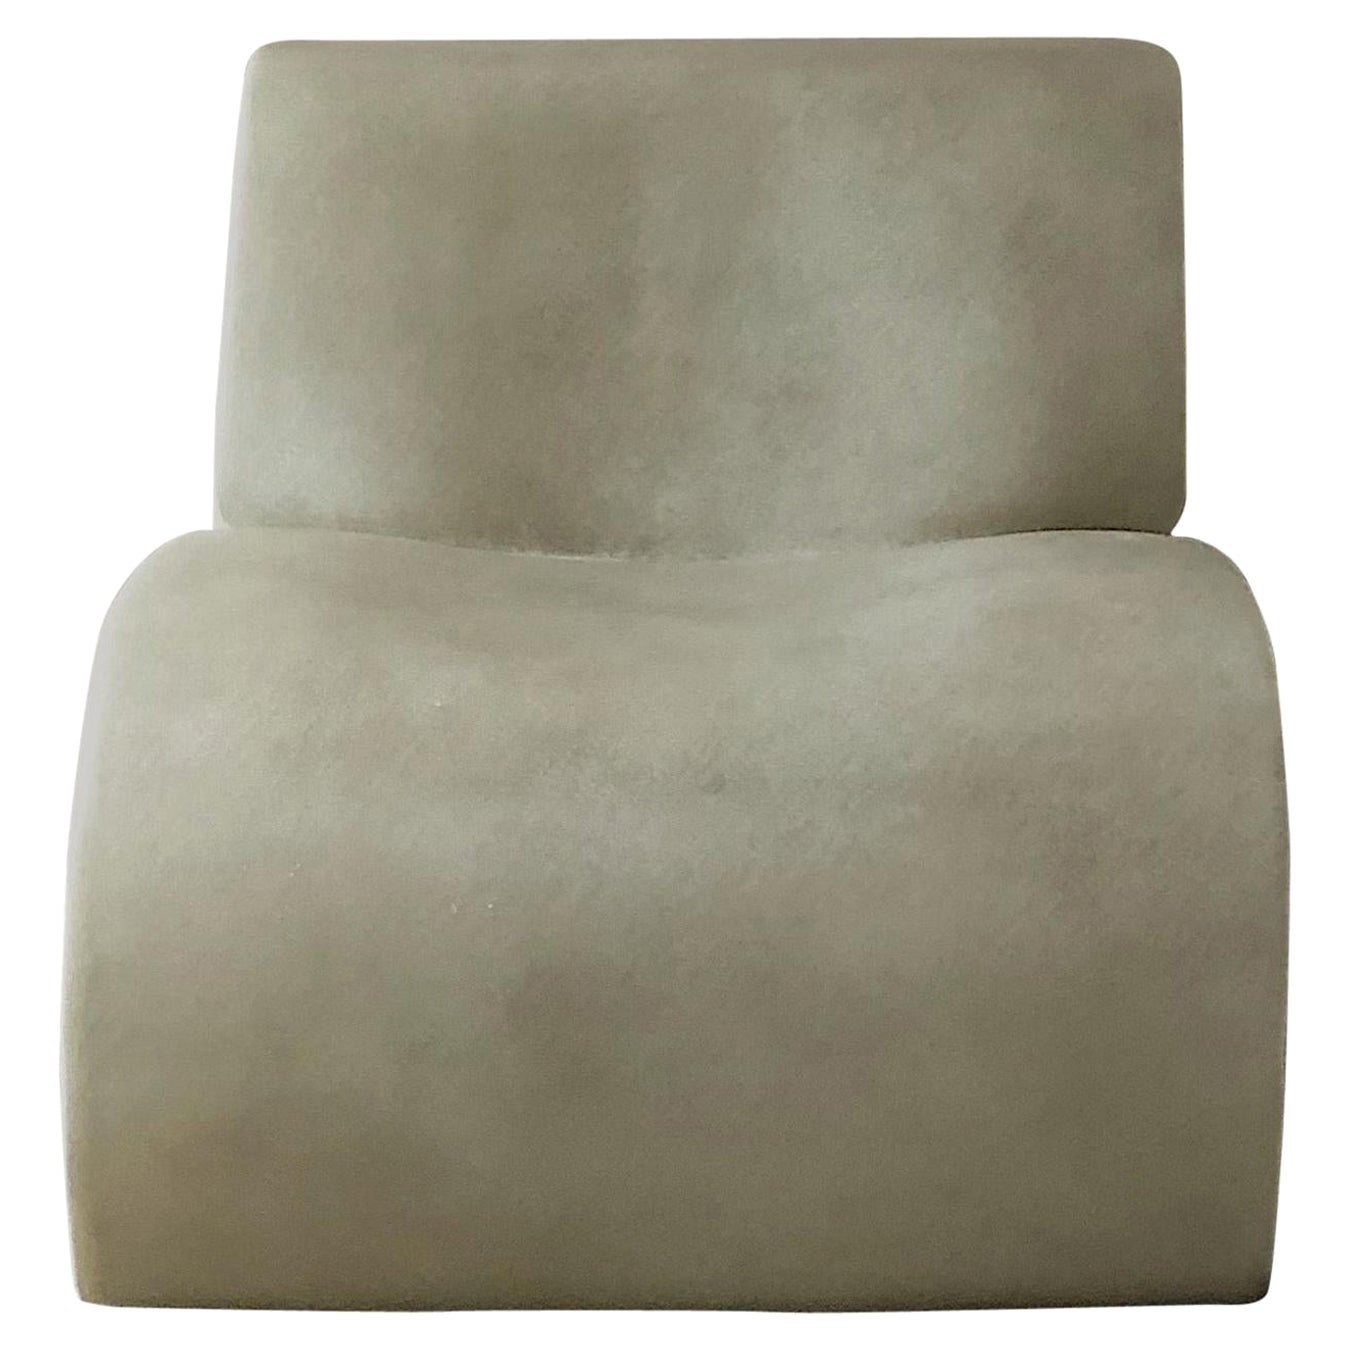 White Curl Up Lounge Chair by Karstudio